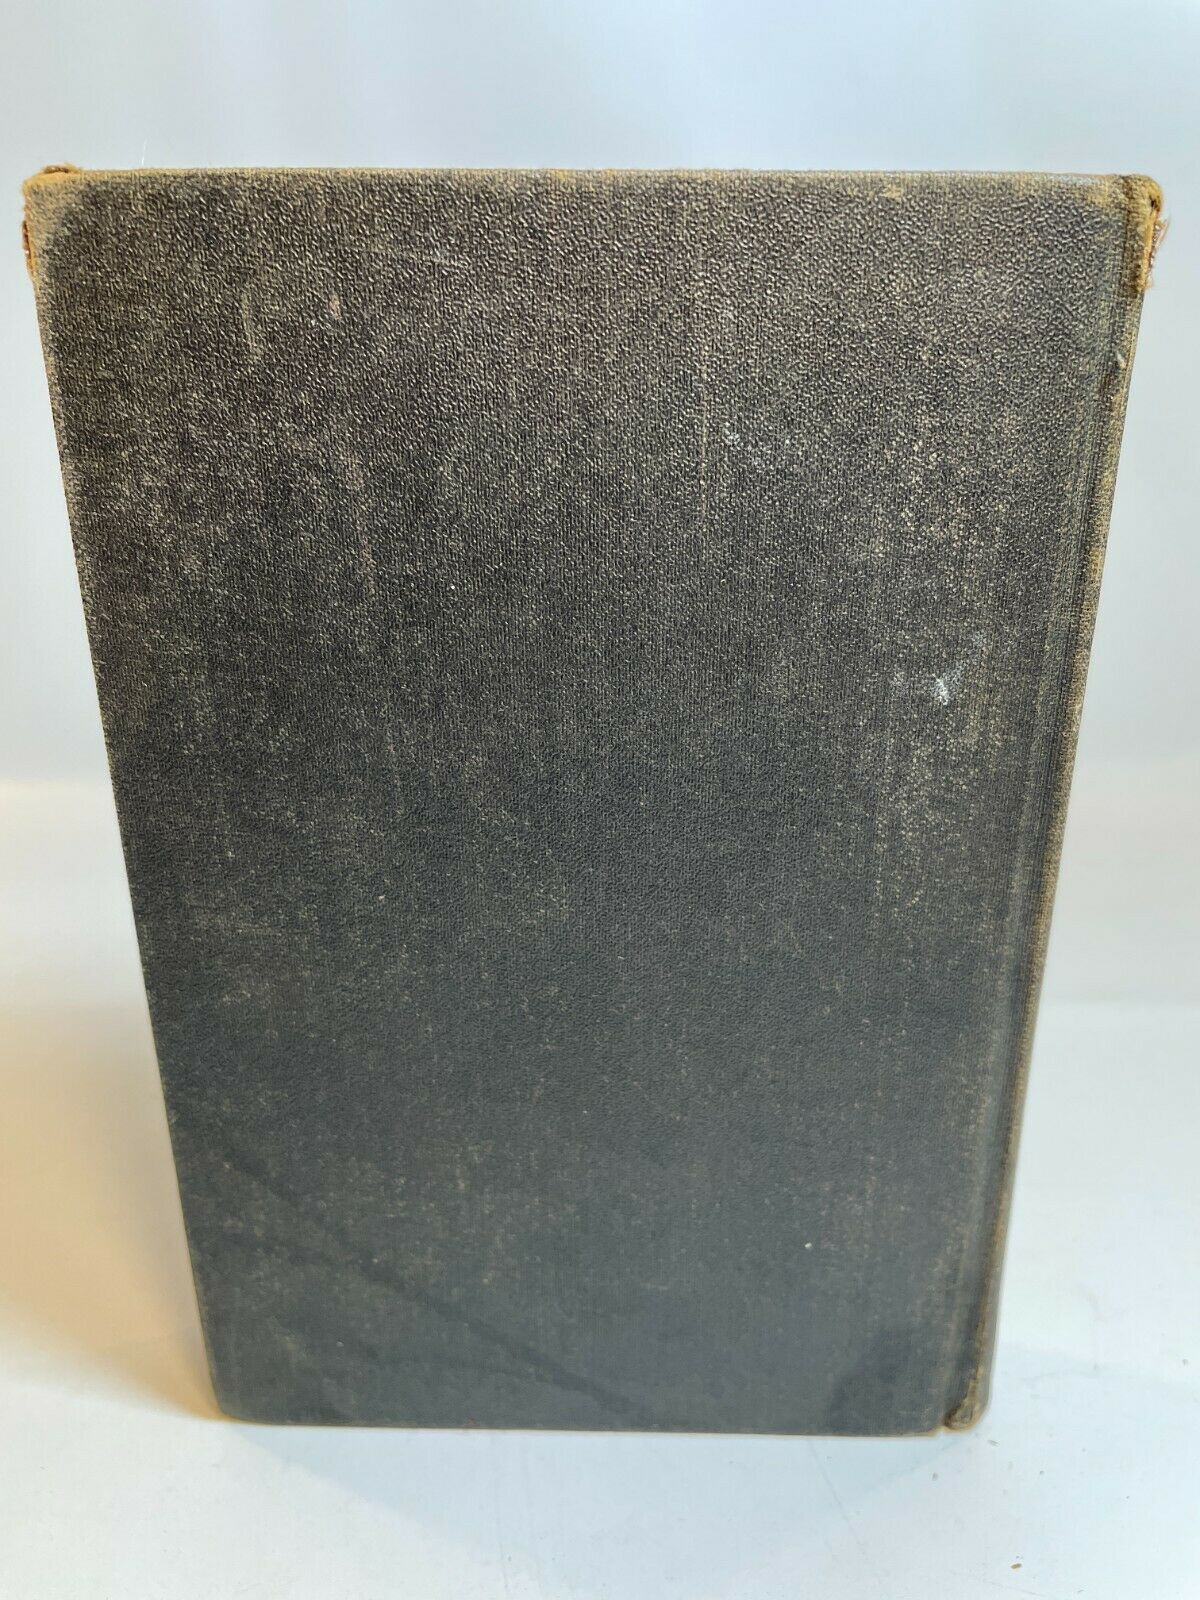 Lives of Today and Yesterday,  Rowan K. Keyes, (1931) HC A2